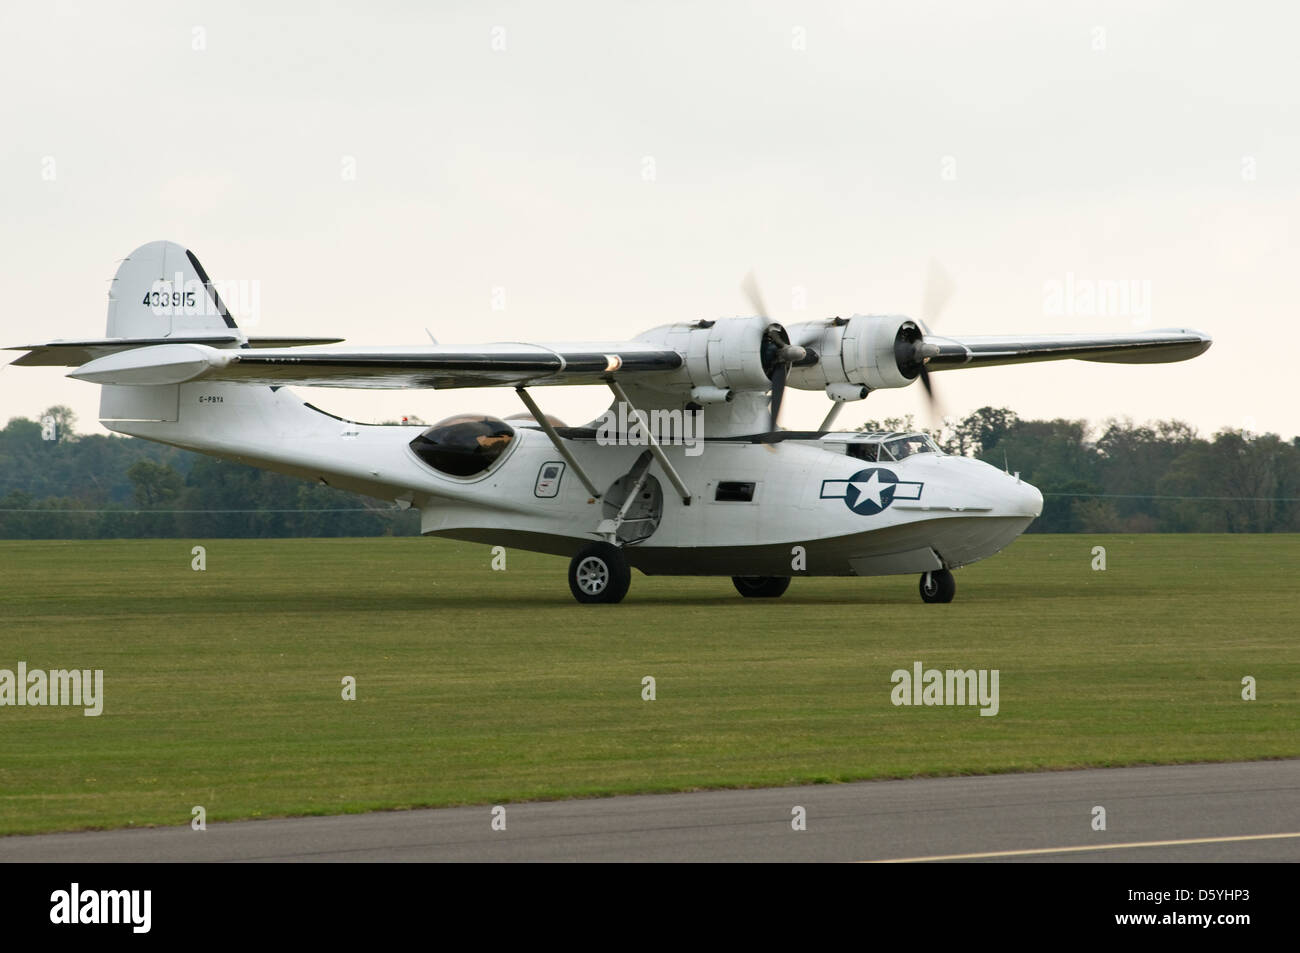 A vintage USAF Catalina 'sea plane' on an airfield, engines running shortly after landing. Stock Photo